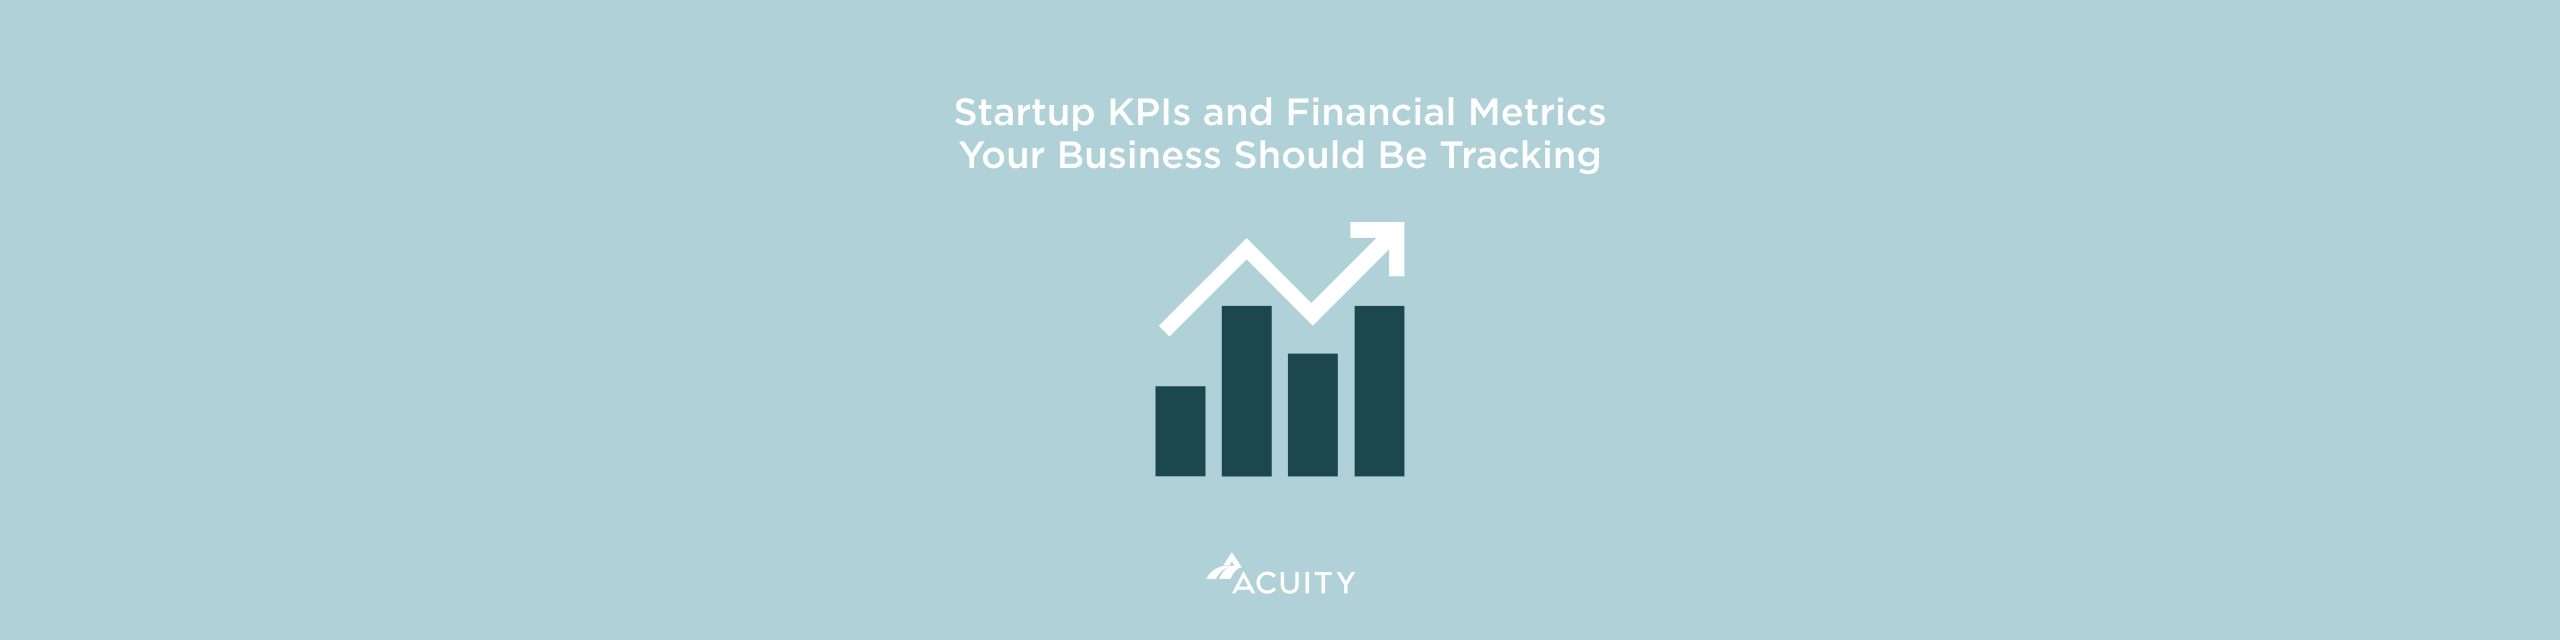 Startup KPIs and Financial Metrics Your Business Should Be Tracking